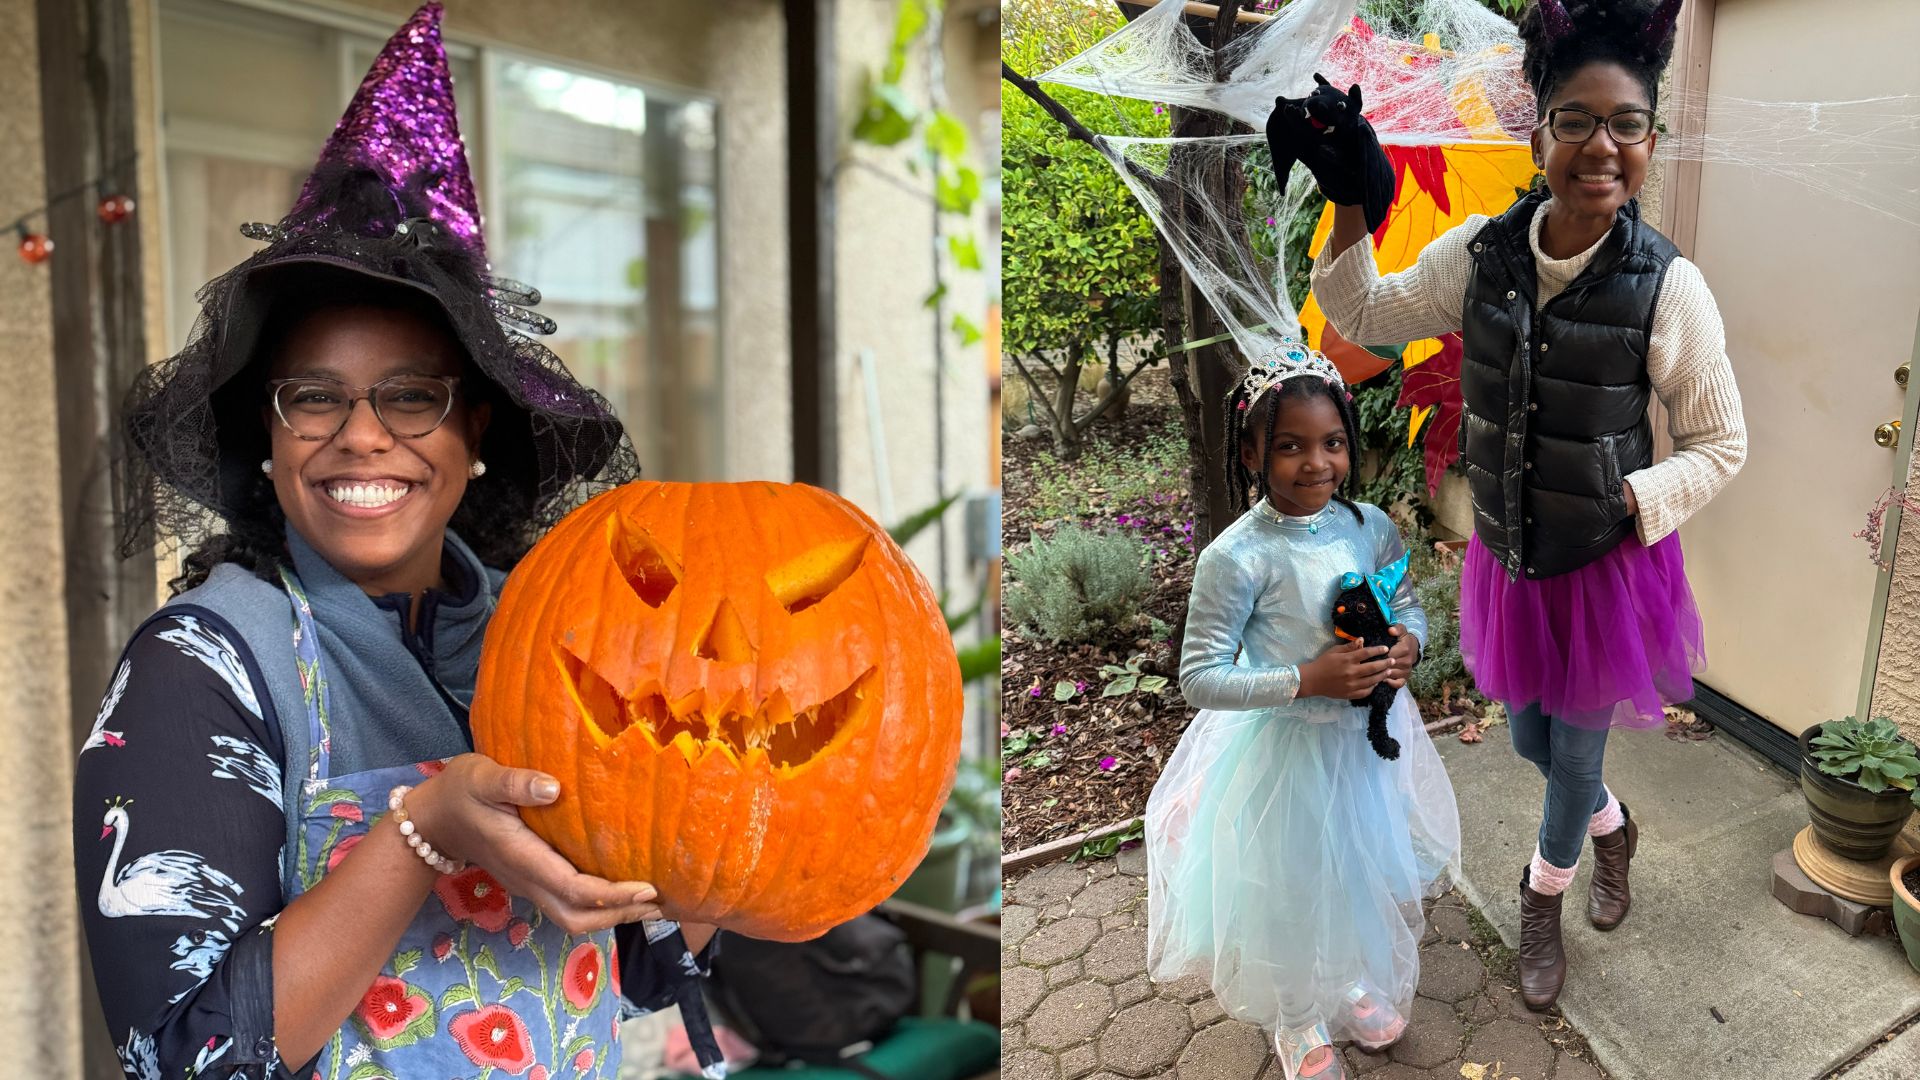 On the left side of the image, Kara wears a black pointed witch hat and holds up a smiling carved pumpkin. On the right side of the image, Rosani wears a bright pink tutu and holds up a stuffed black bat over her daughter next to her who wears a princess dress from the movie Frozen.